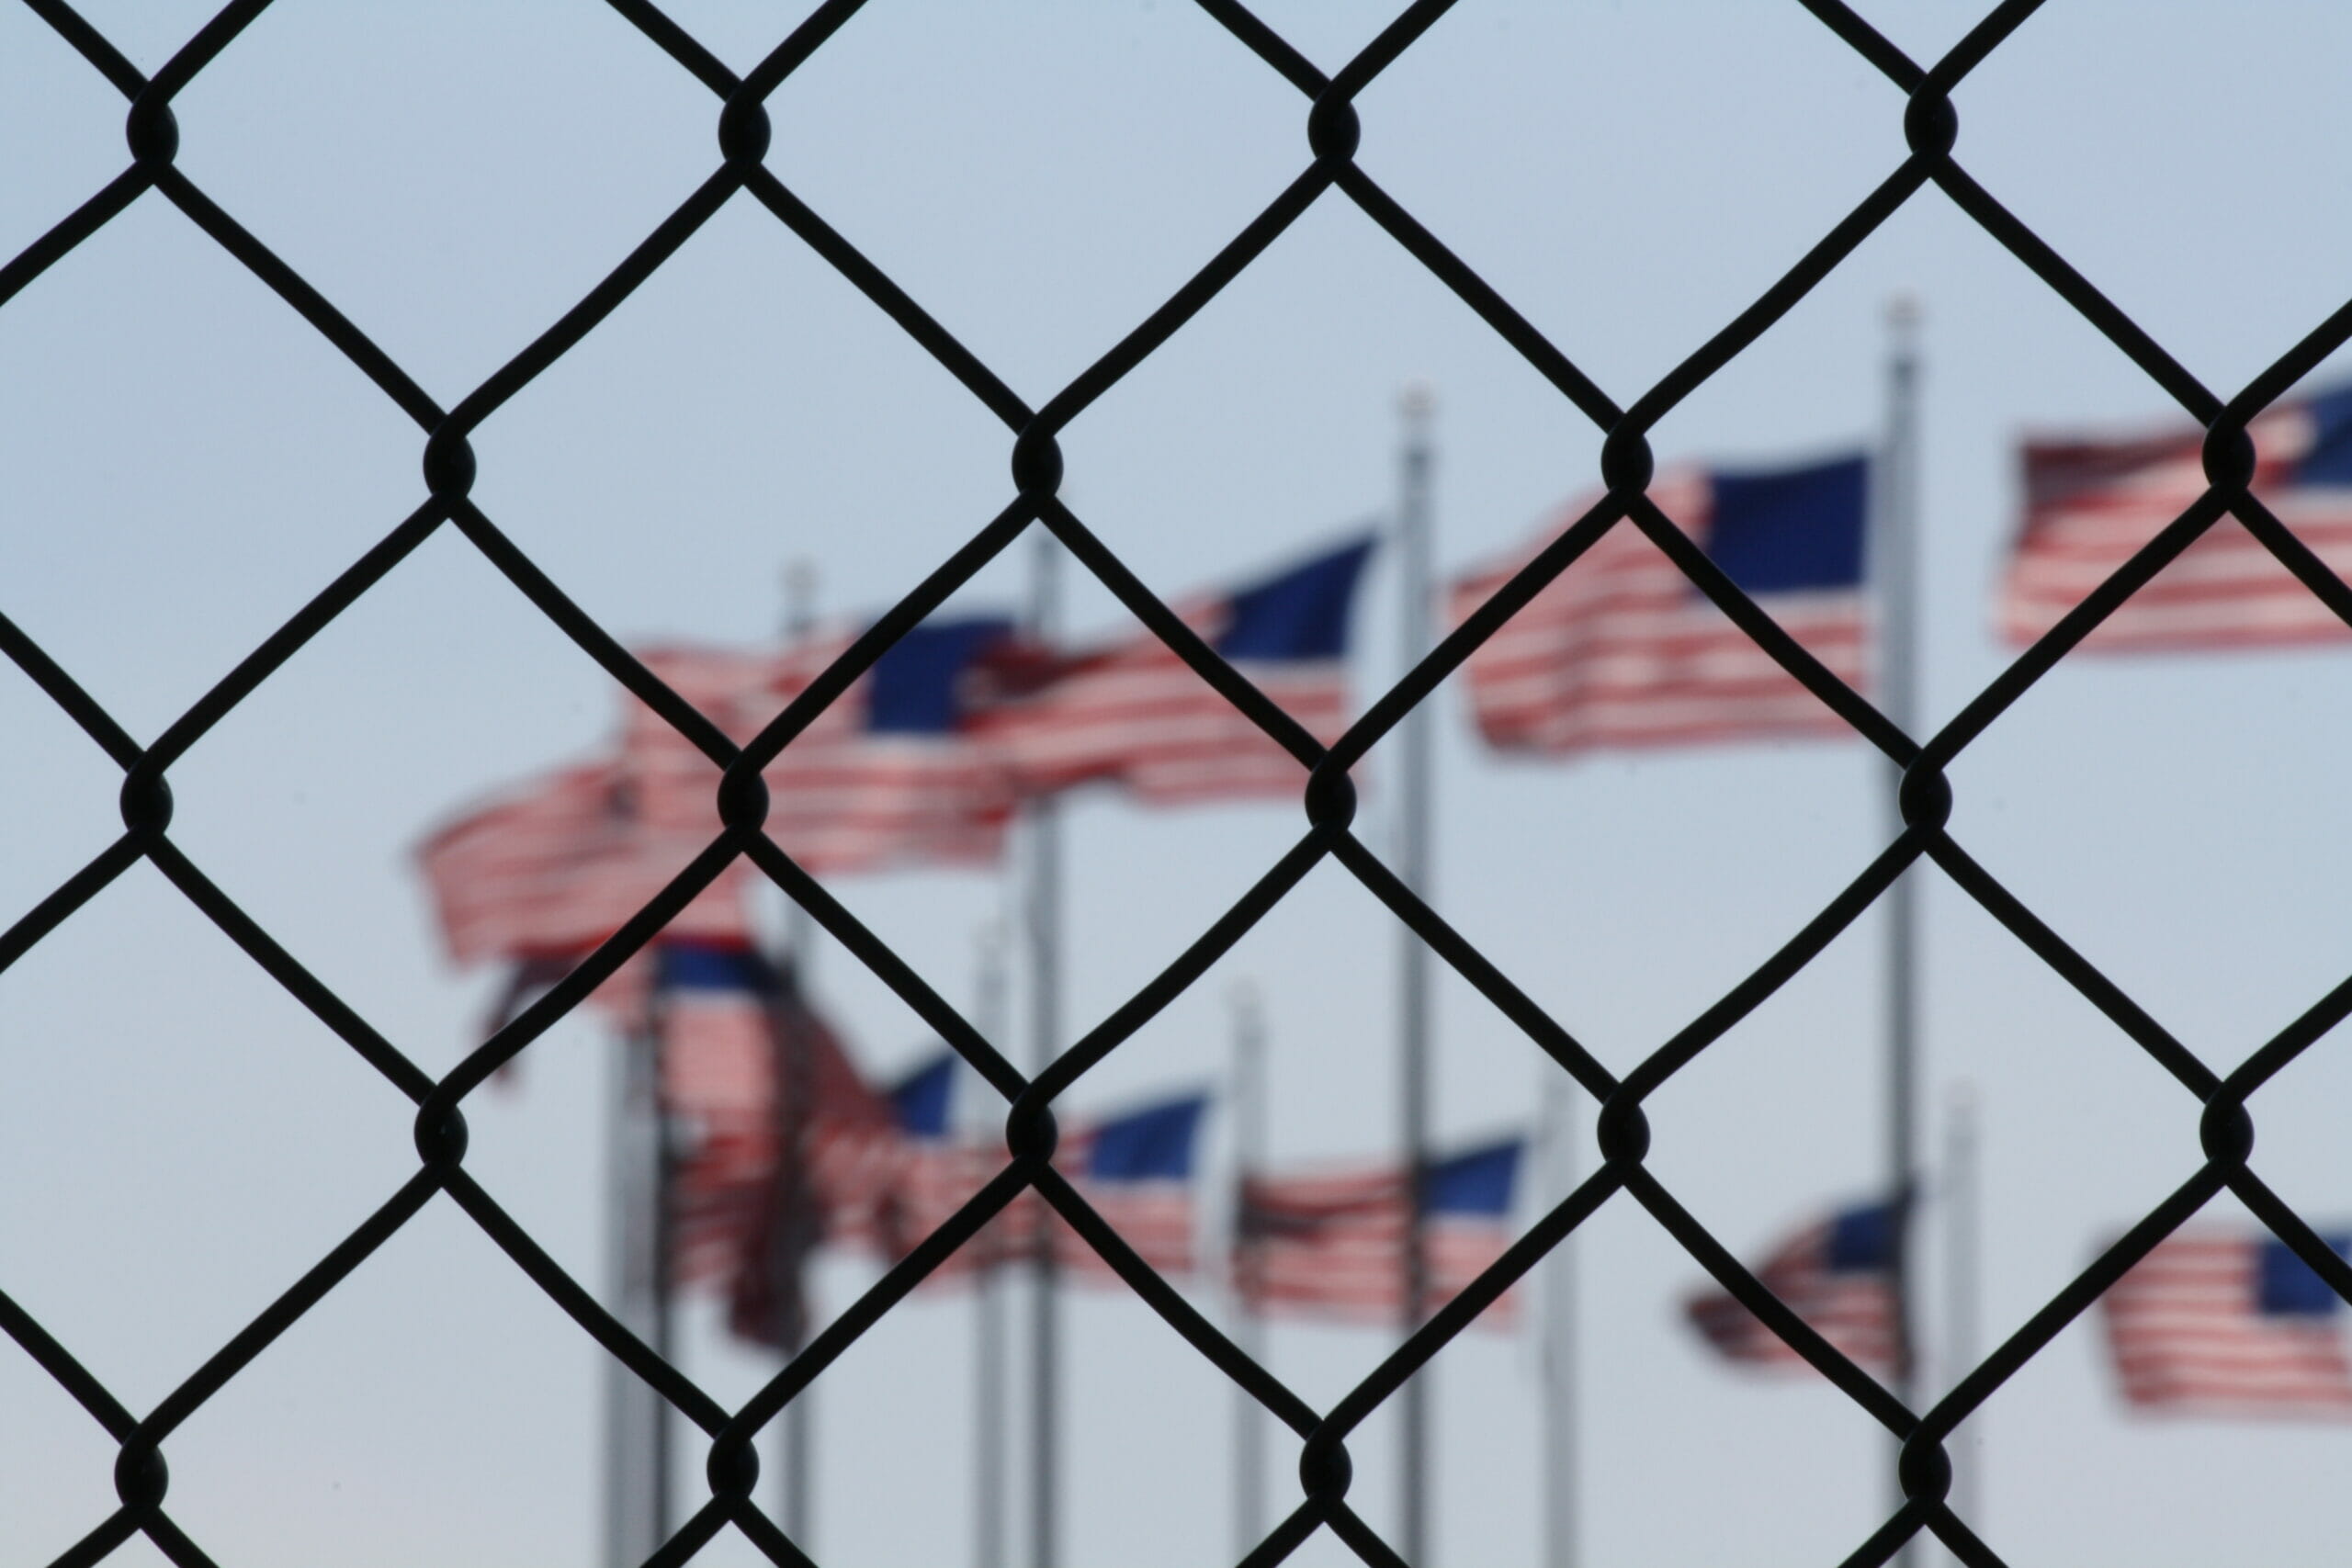 American flags behind a fence